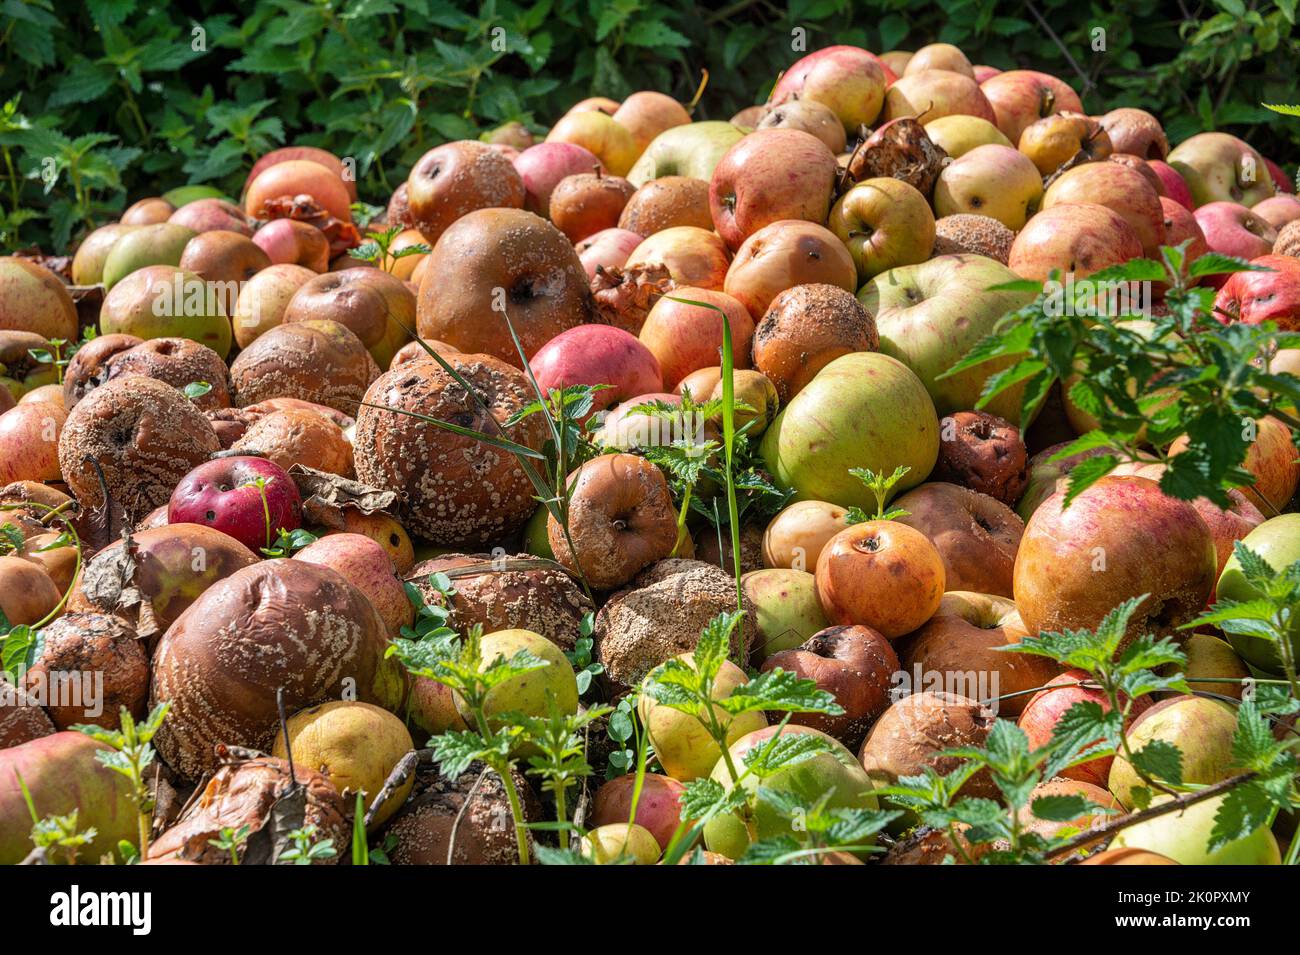 Pile of rotting apples, food waste. Stock Photo